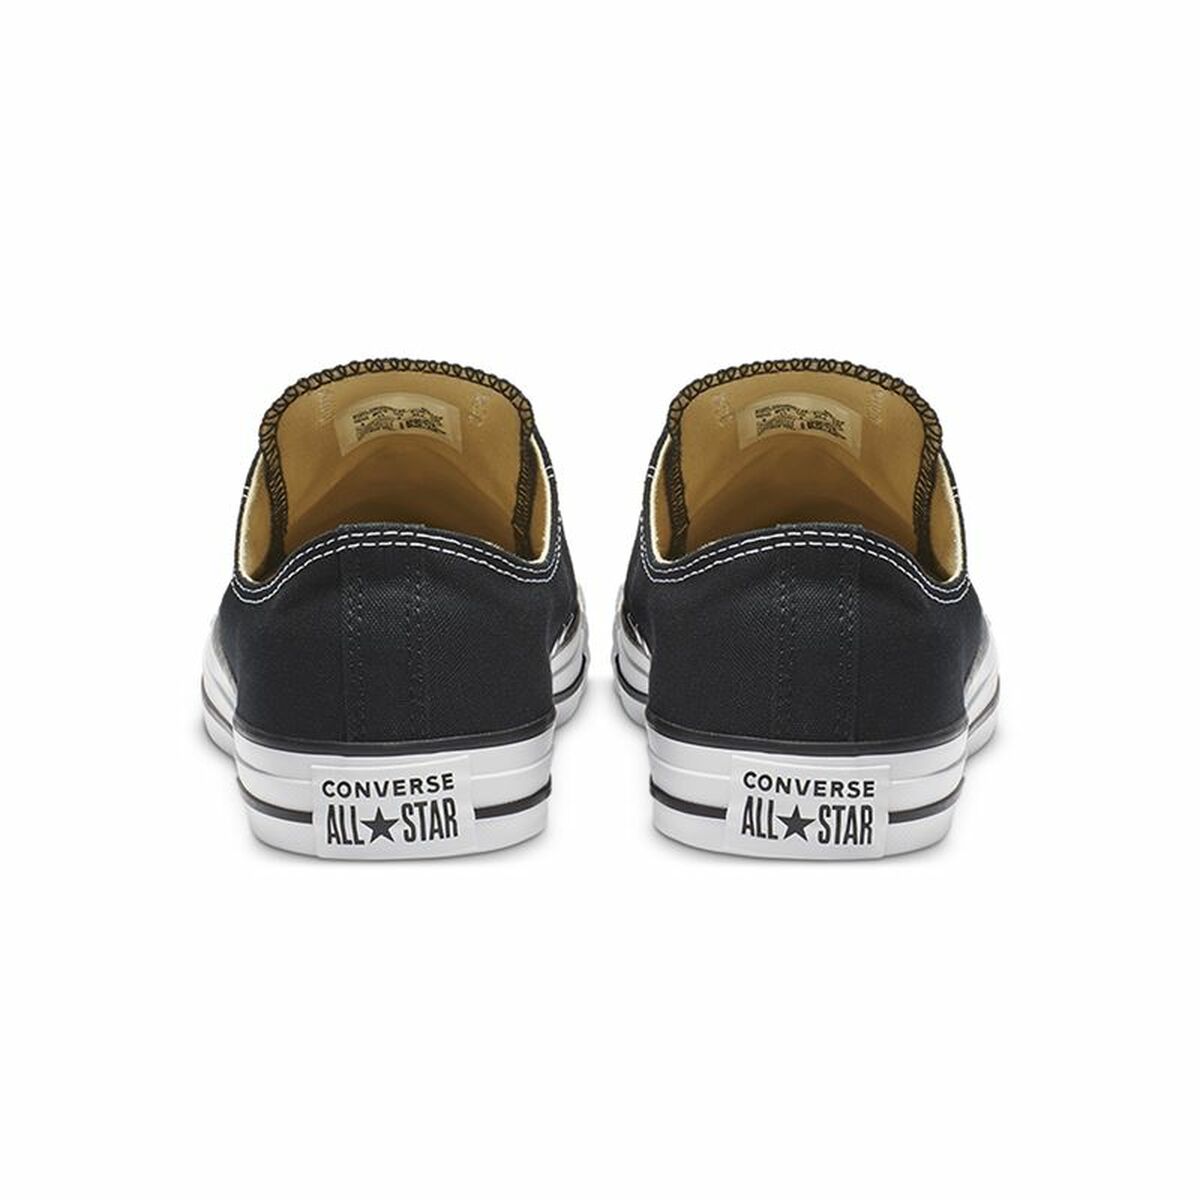 Unisex Casual Trainers Converse All-Star Black